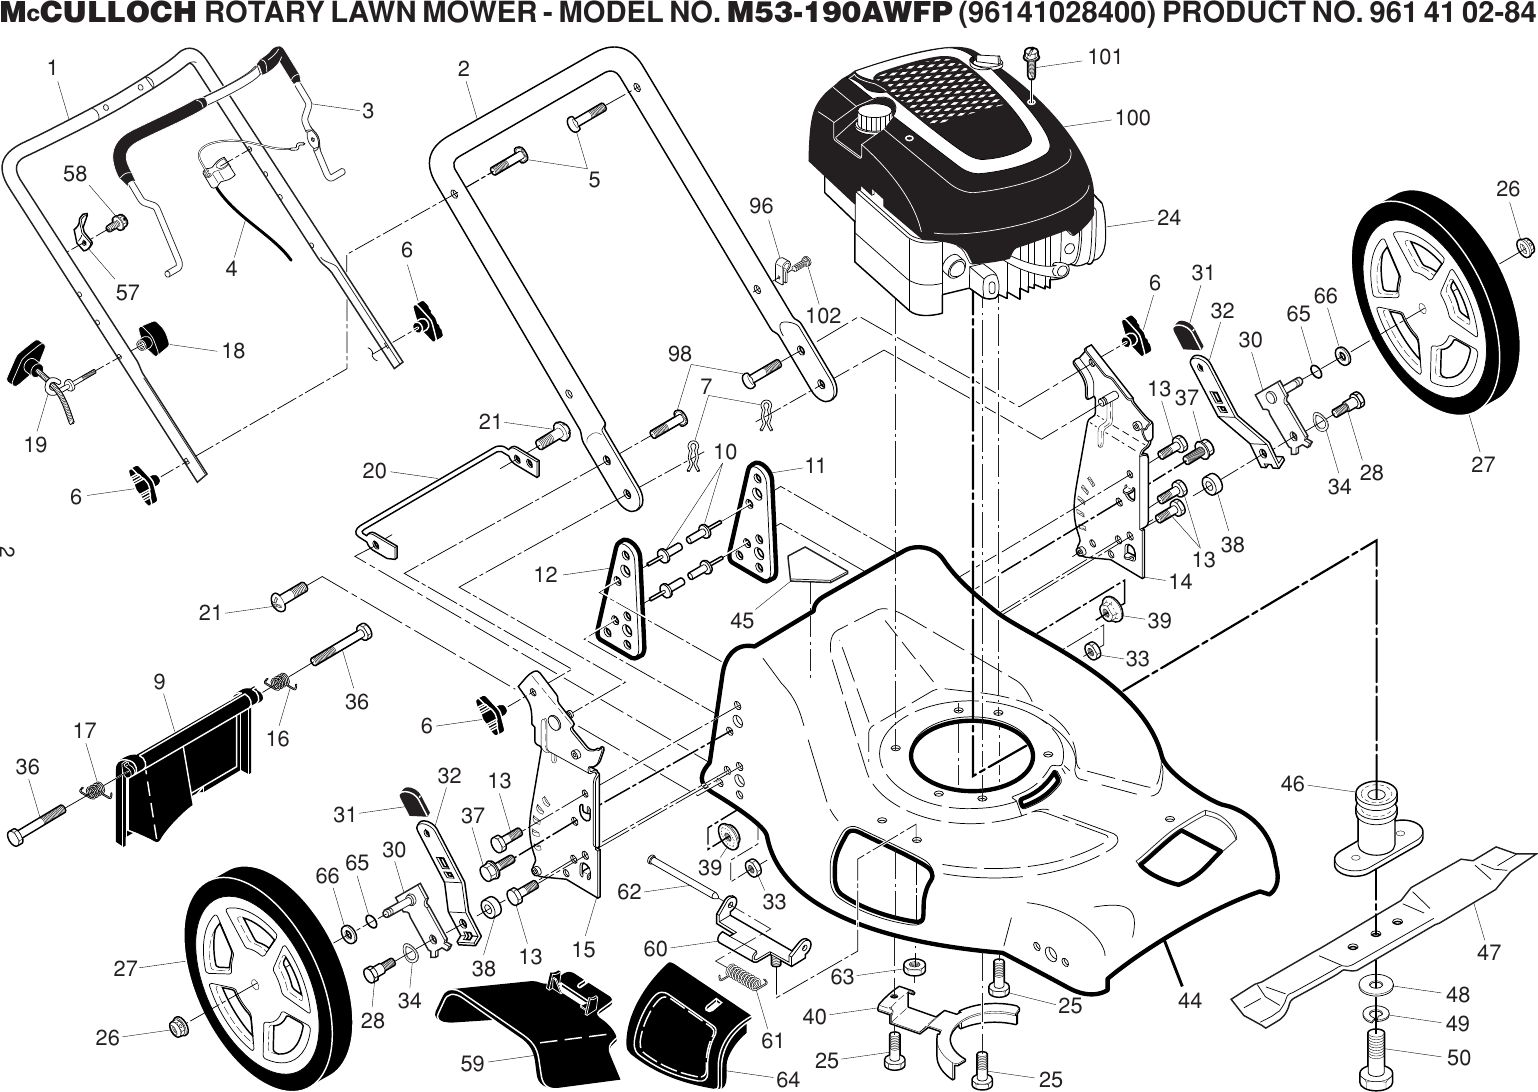 Page 2 of 5 - McCulloch M53-190AWFP IPL, McCulloch, M53-190AWFP, 96141028400, 2013-11, Lawn Mower User Manual  To The 5052dc1f-8f17-4e4a-baa0-c66d6f1bee87